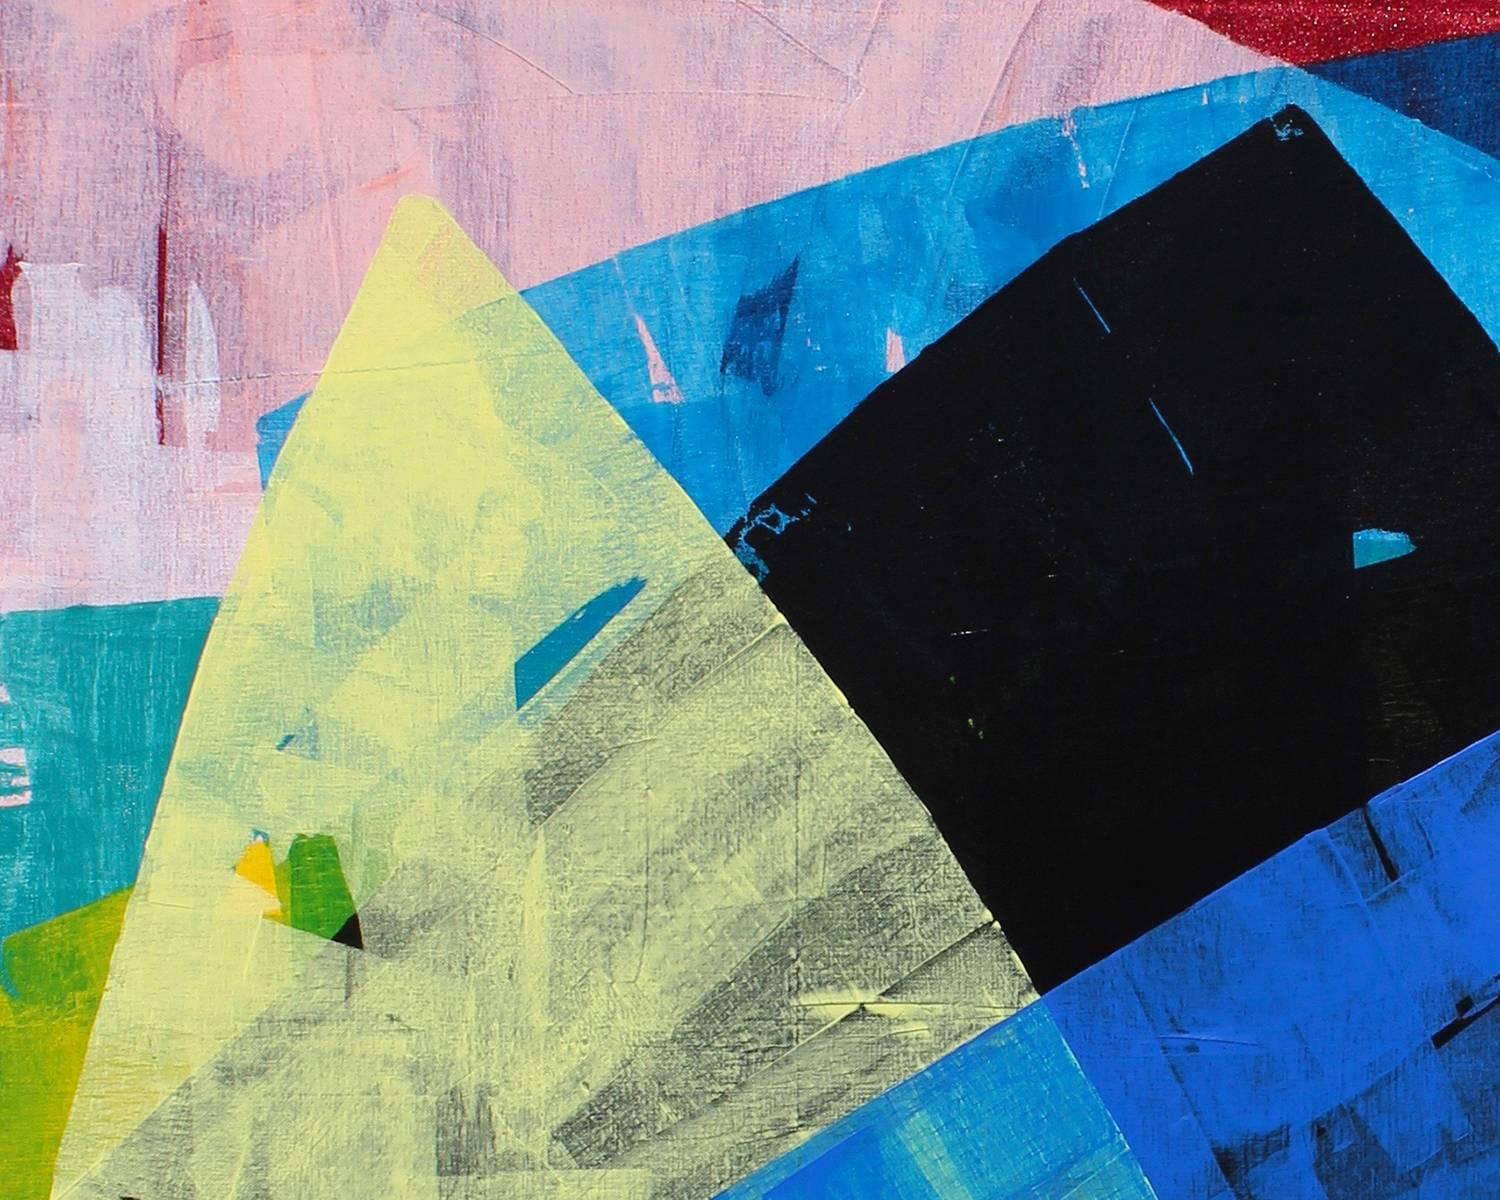 Primary Purpose - Abstract Painting by Laura Dargan